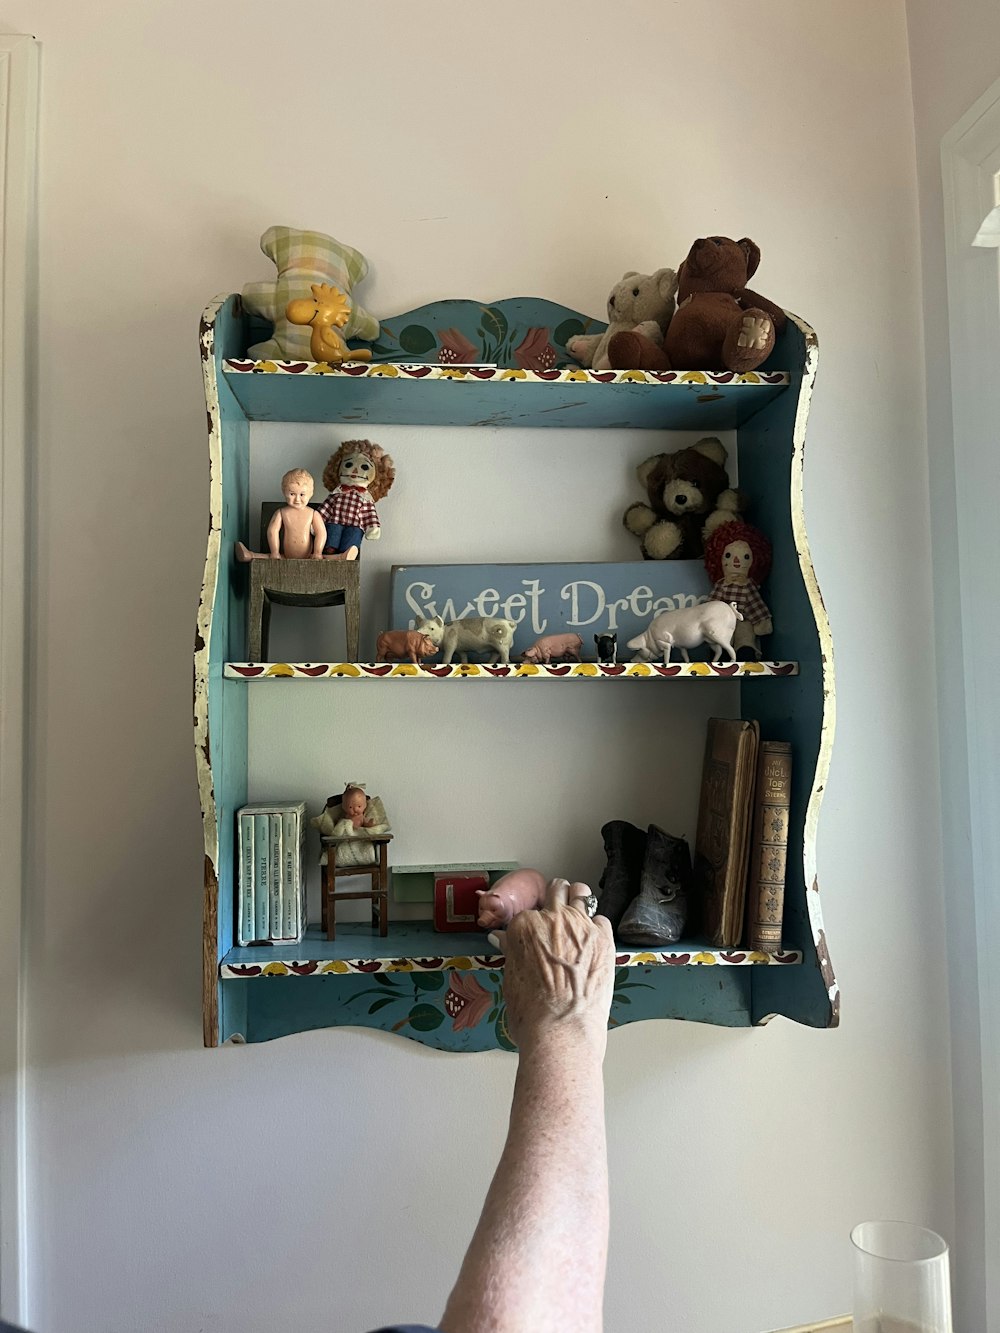 a person sitting in front of a book shelf